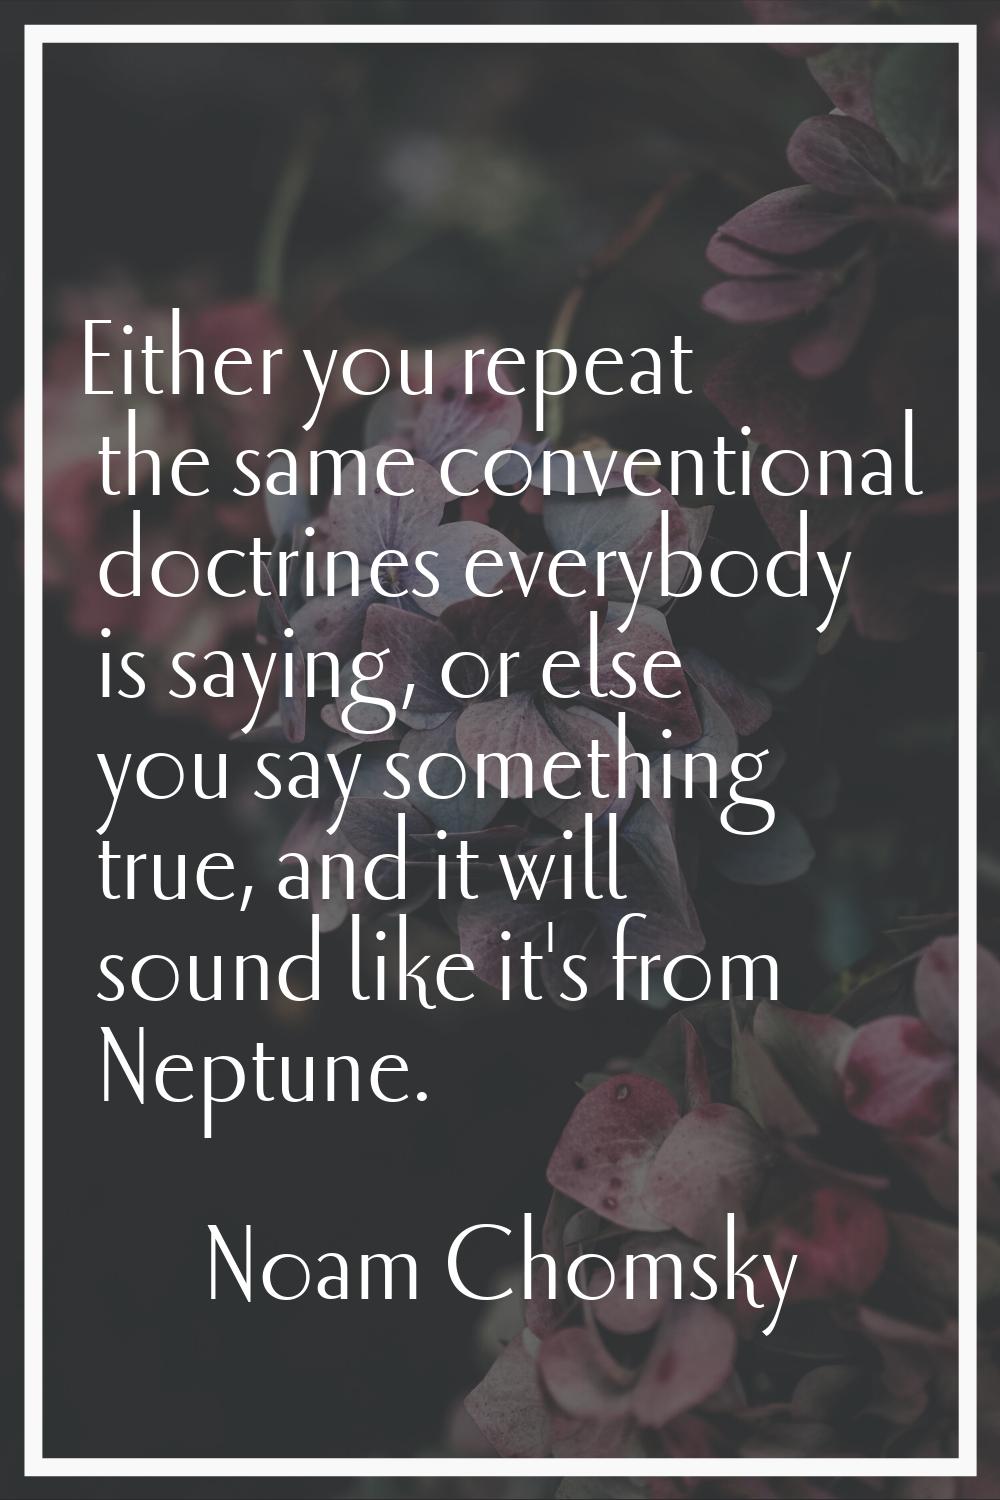 Either you repeat the same conventional doctrines everybody is saying, or else you say something tr